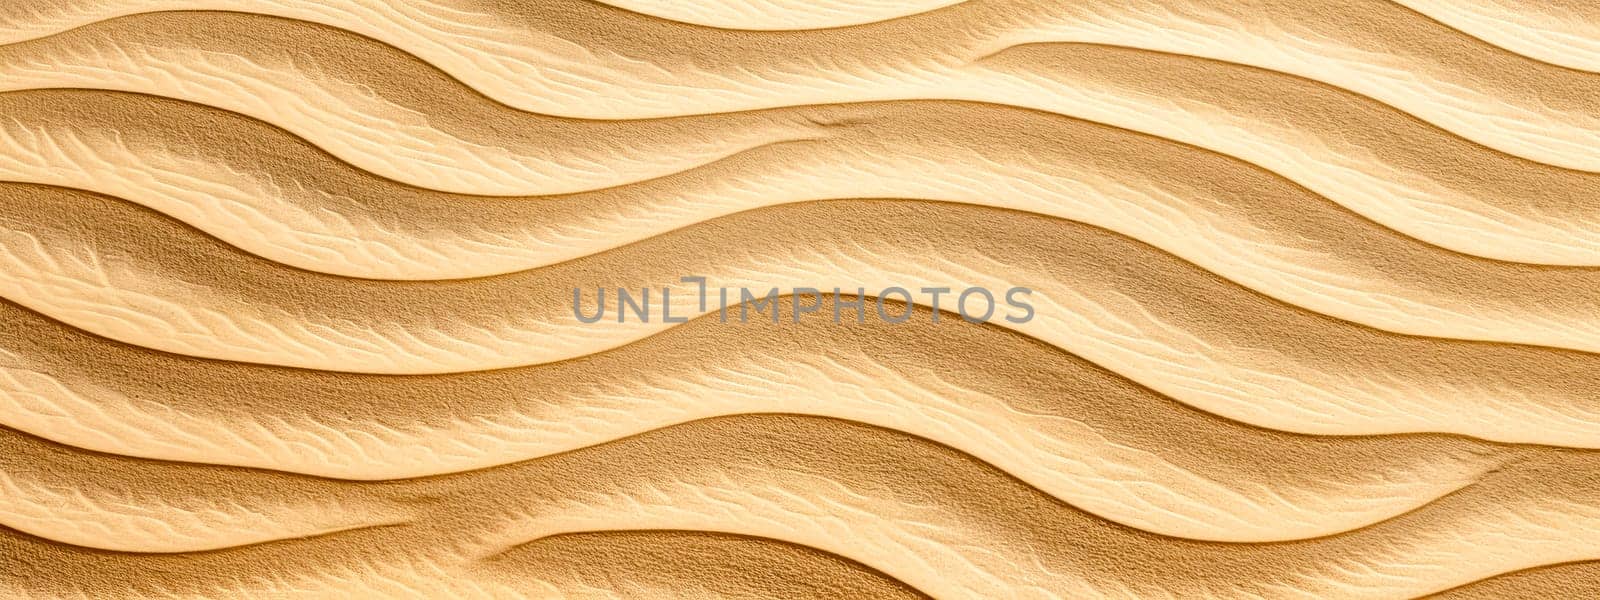 Wavy pattern of golden sand dunes, creating a natural abstract desert landscape by Edophoto